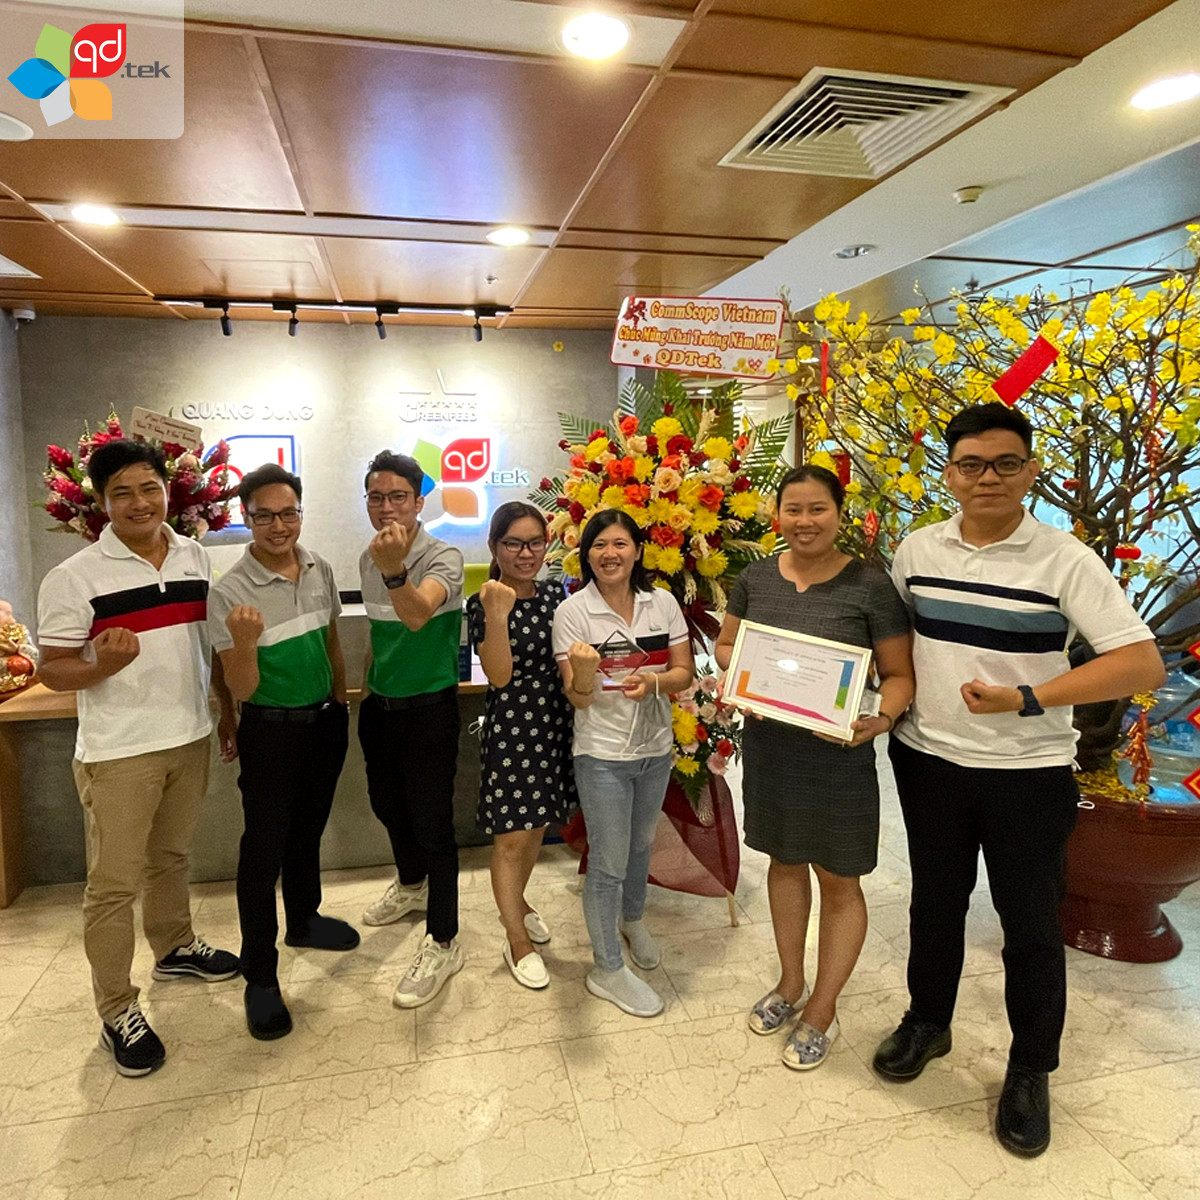 QD.TEK is proud to be the Commscope distributor with the highest revenue in Vietnam for 5 consecutive years and the most effective competition in Southeast Asia in 2021.